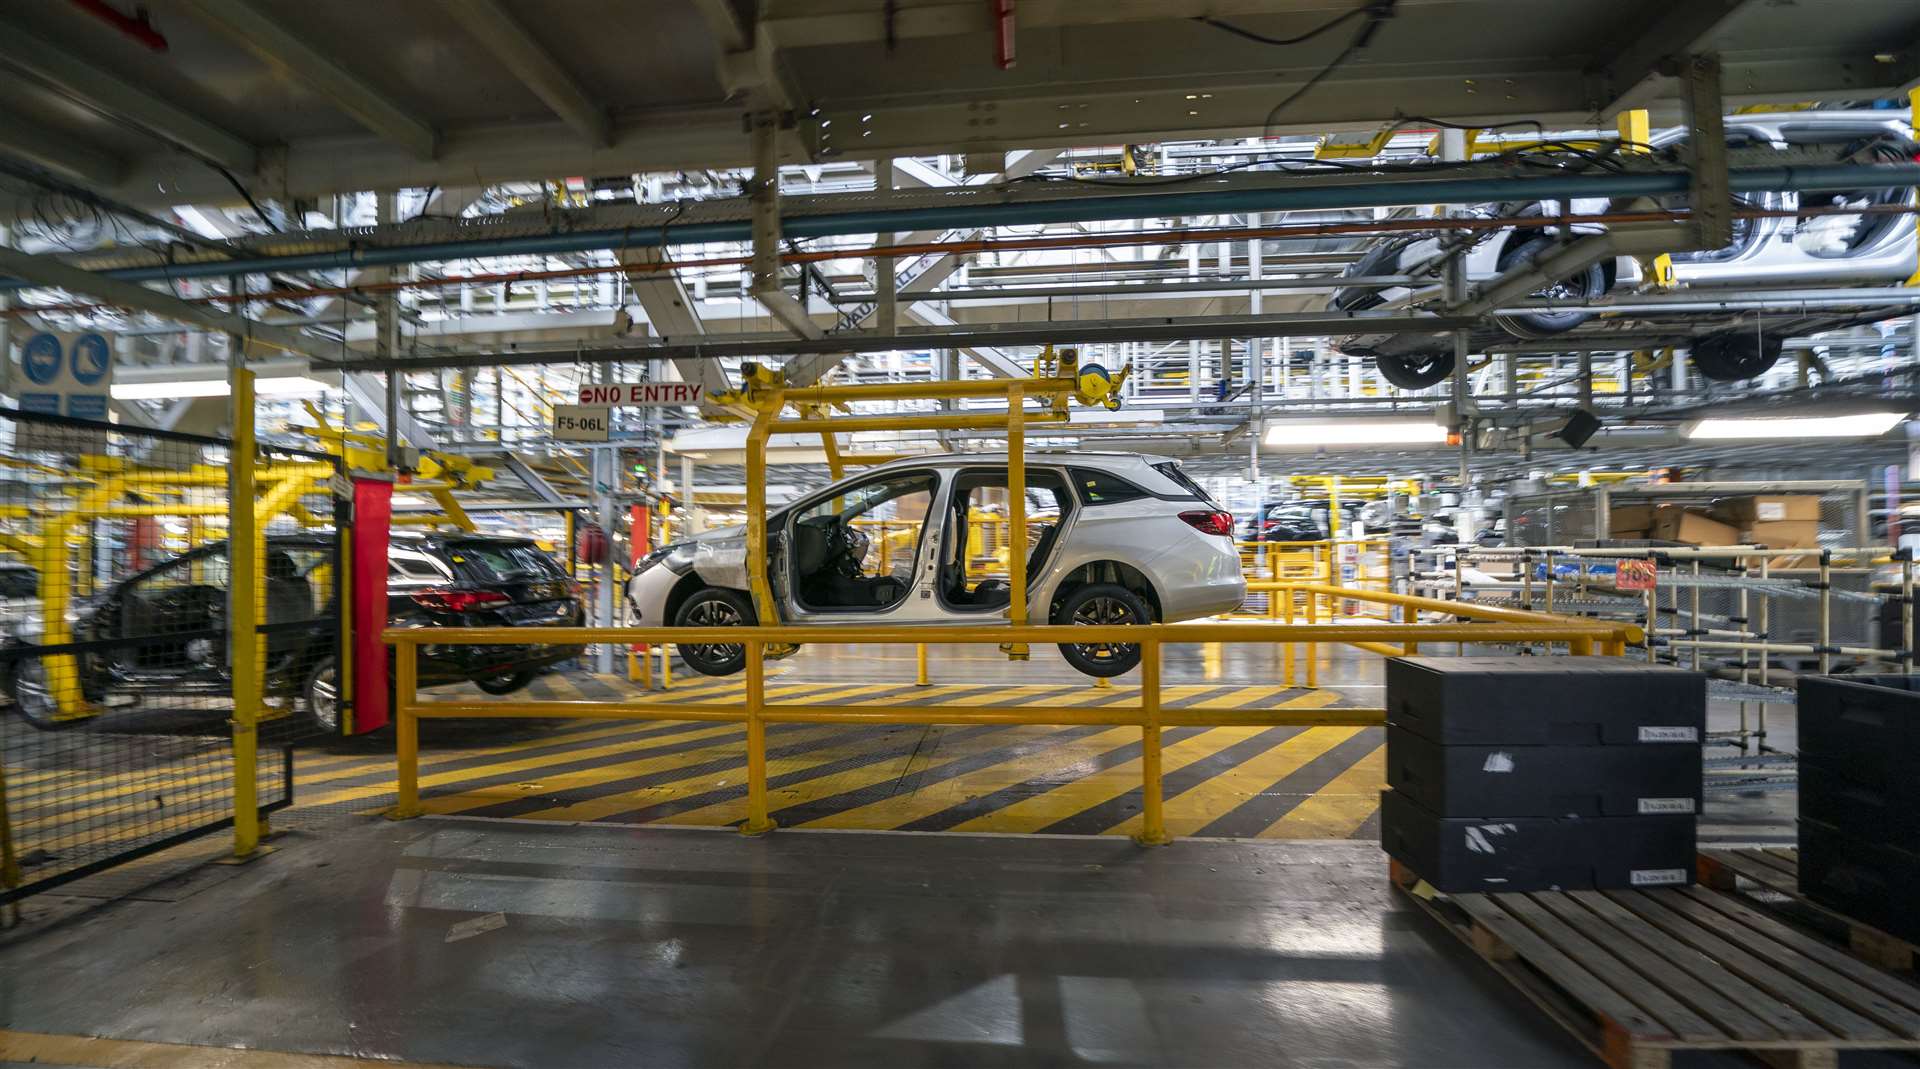 The Astra assembly line at Vauxhall’s plant in Ellesmere Port, Cheshire (PA)